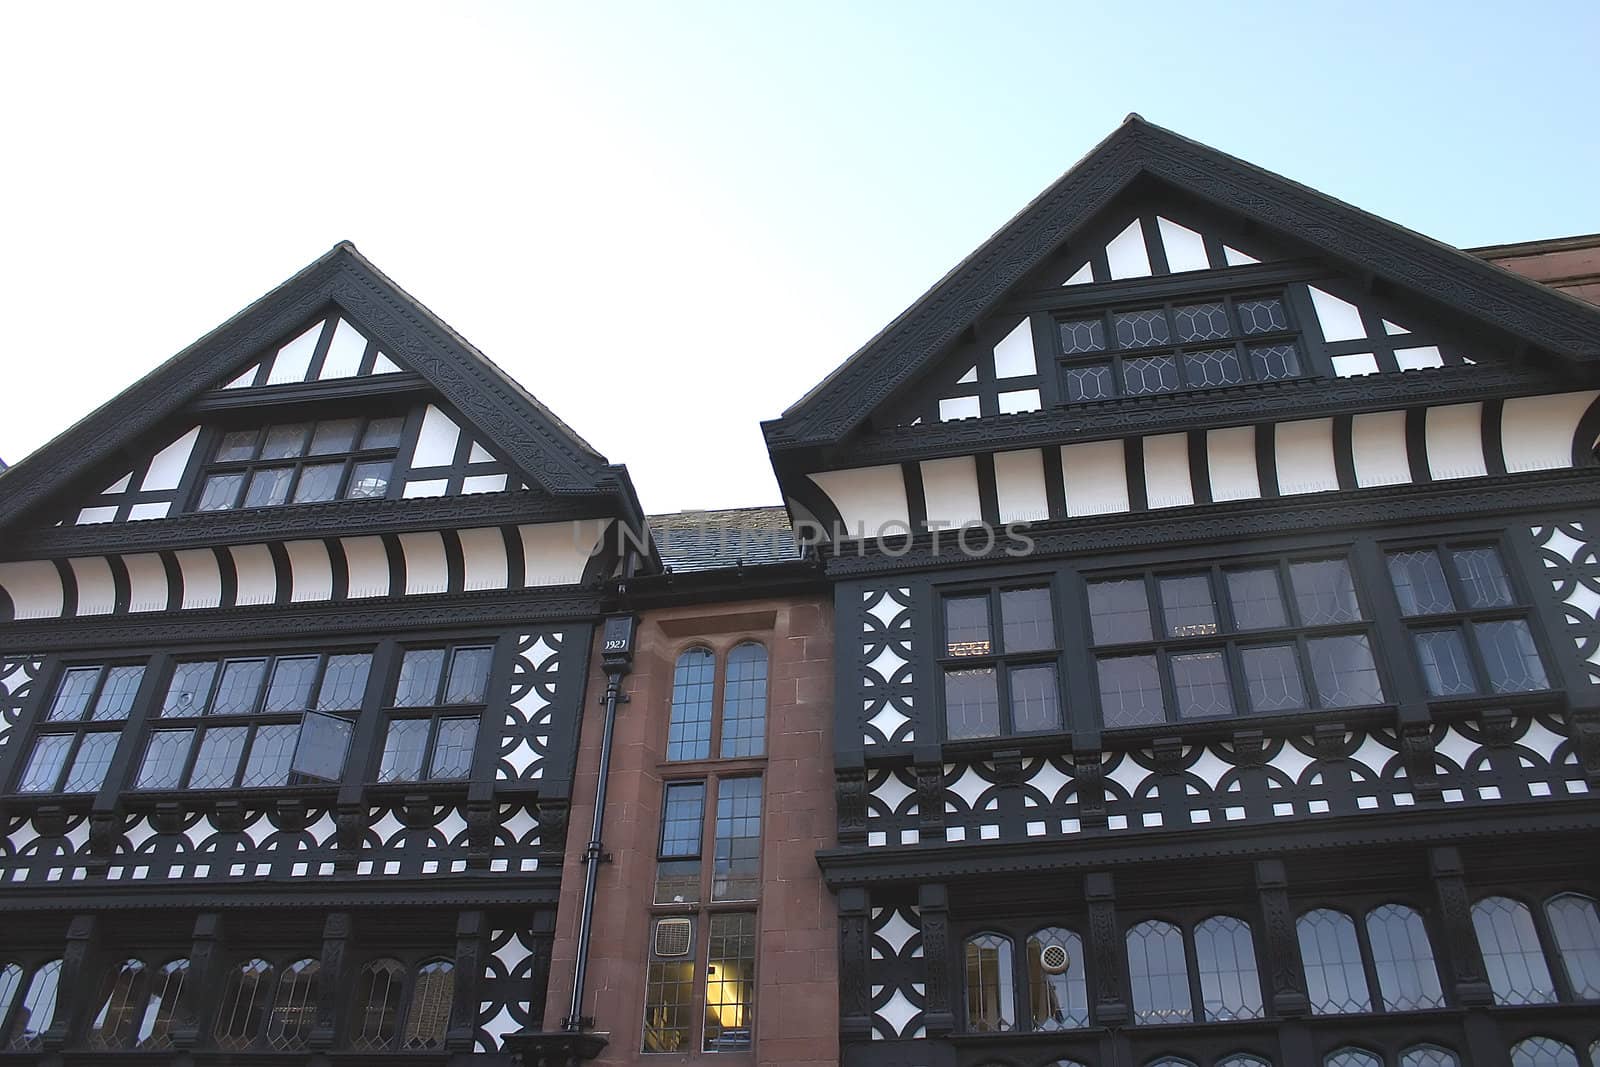 Black and White Buildings in Chester